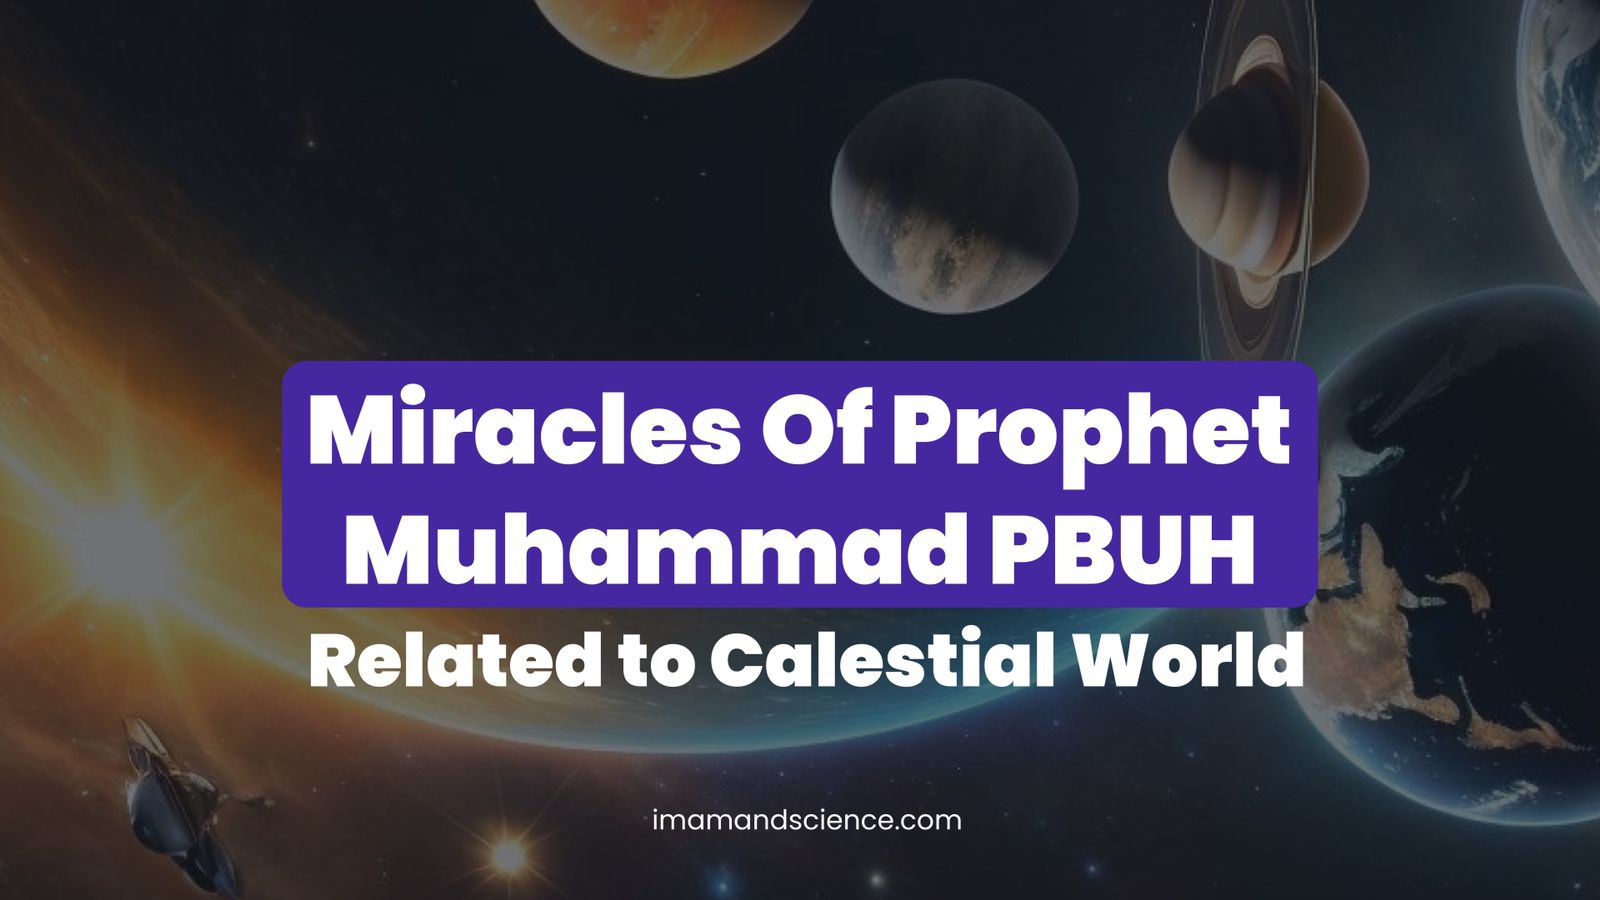 Miracles of Holy Prophet PBUH related to the Celestial World